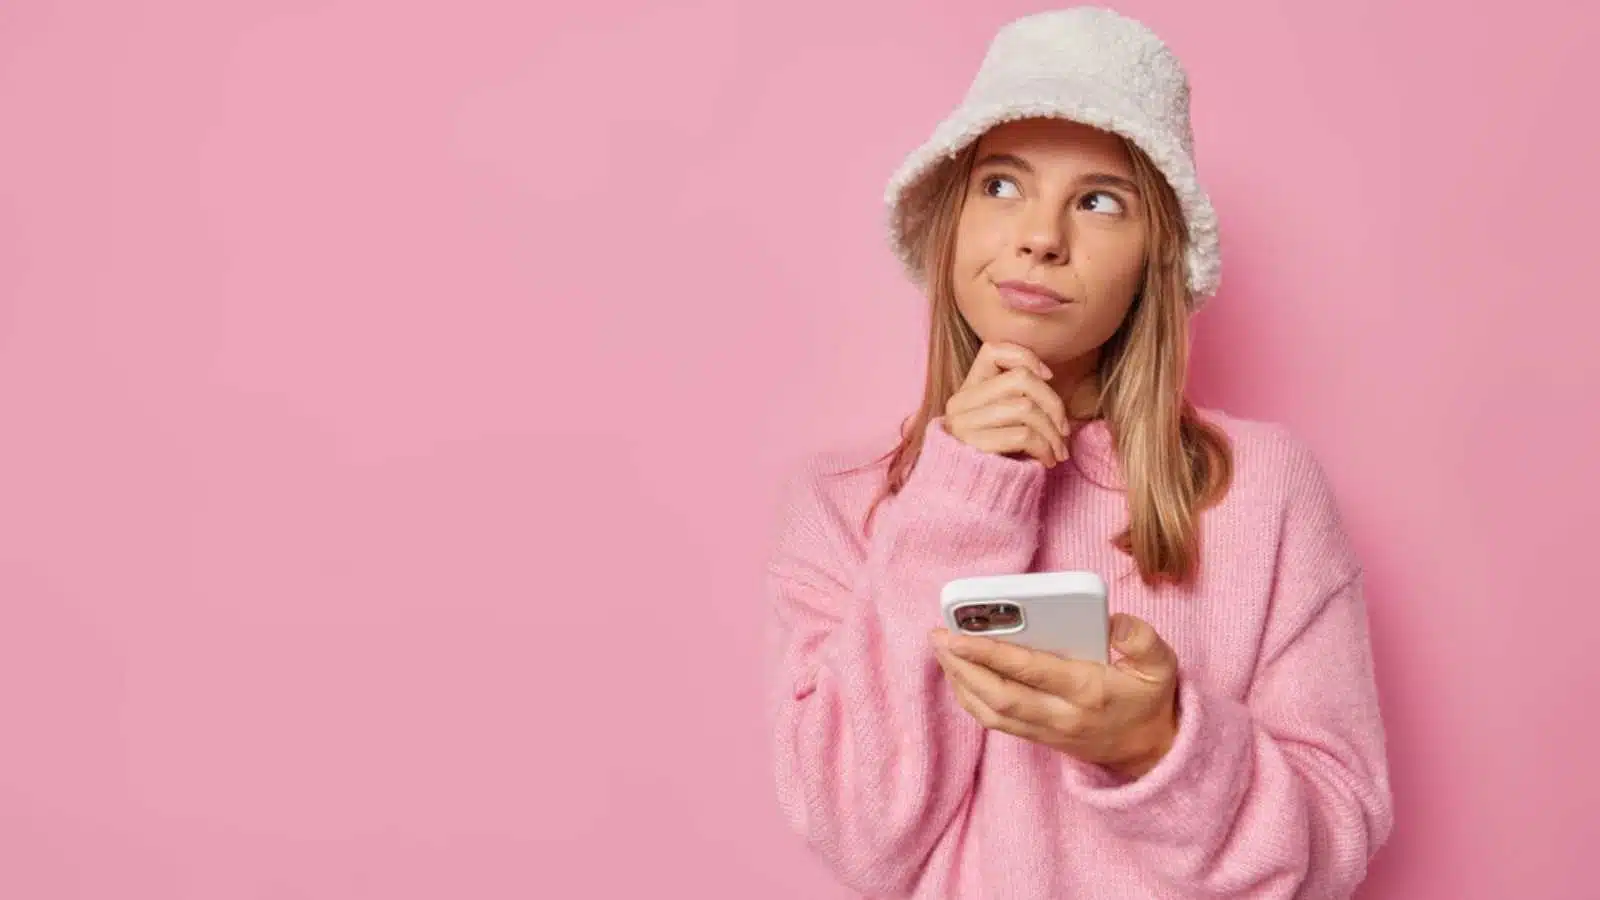 Doubtful young lovely woman holds chin thinks about mobile online offer wears hat and casual jumper looks away contemplates about something isolated over pink background with copy space on left